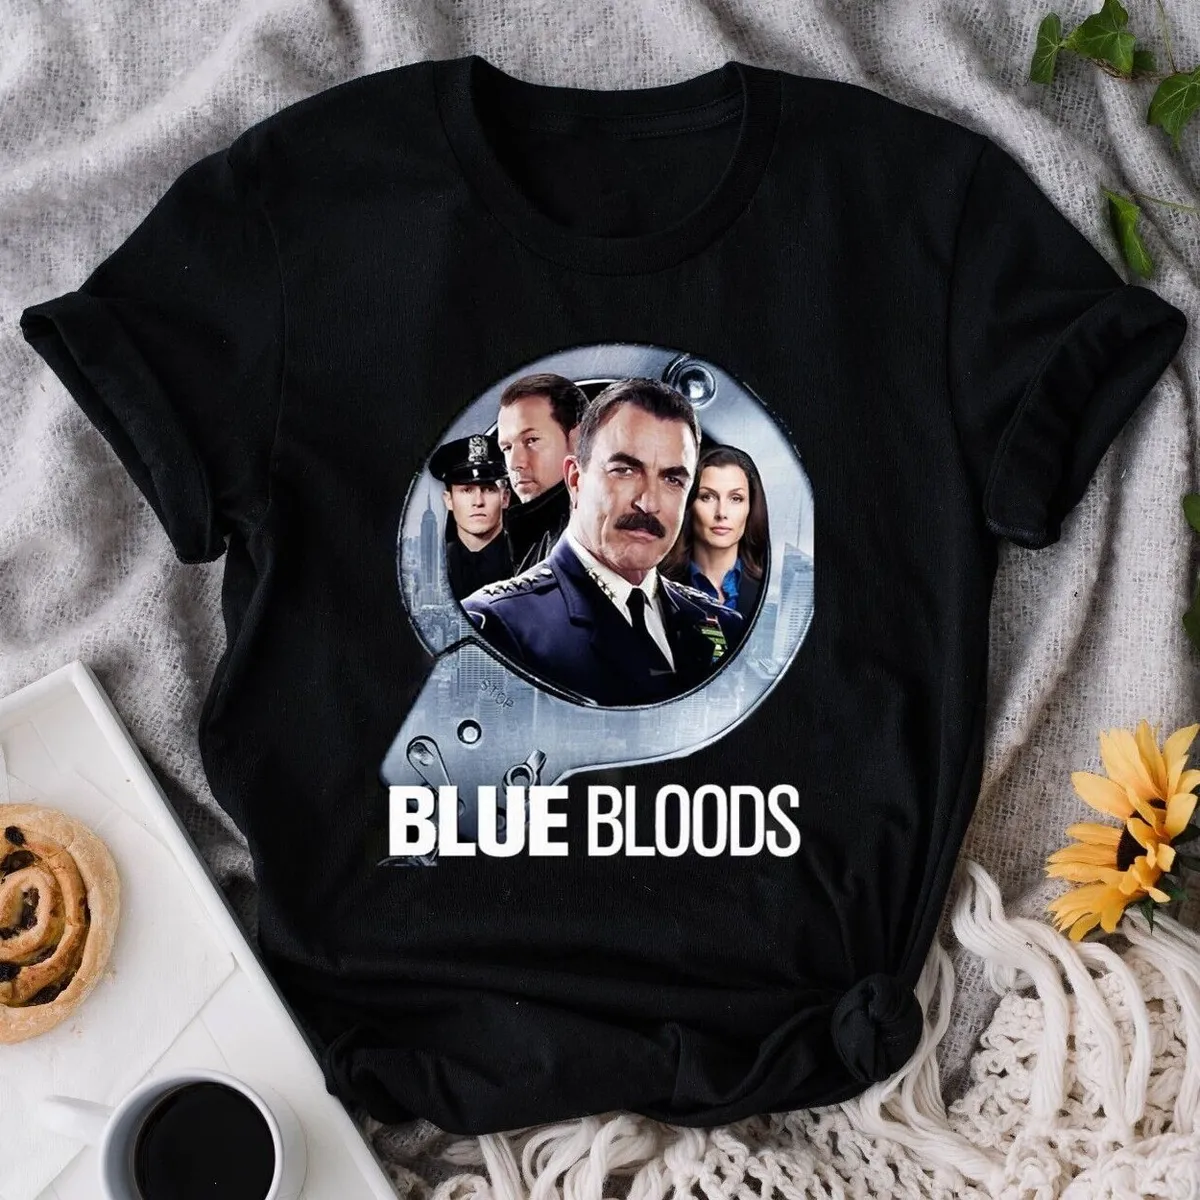 Blue Bloods Movie Reagan Family Tom Selleck Donnie Wahlberg Cop Gift Fan T- Shirt | eBay